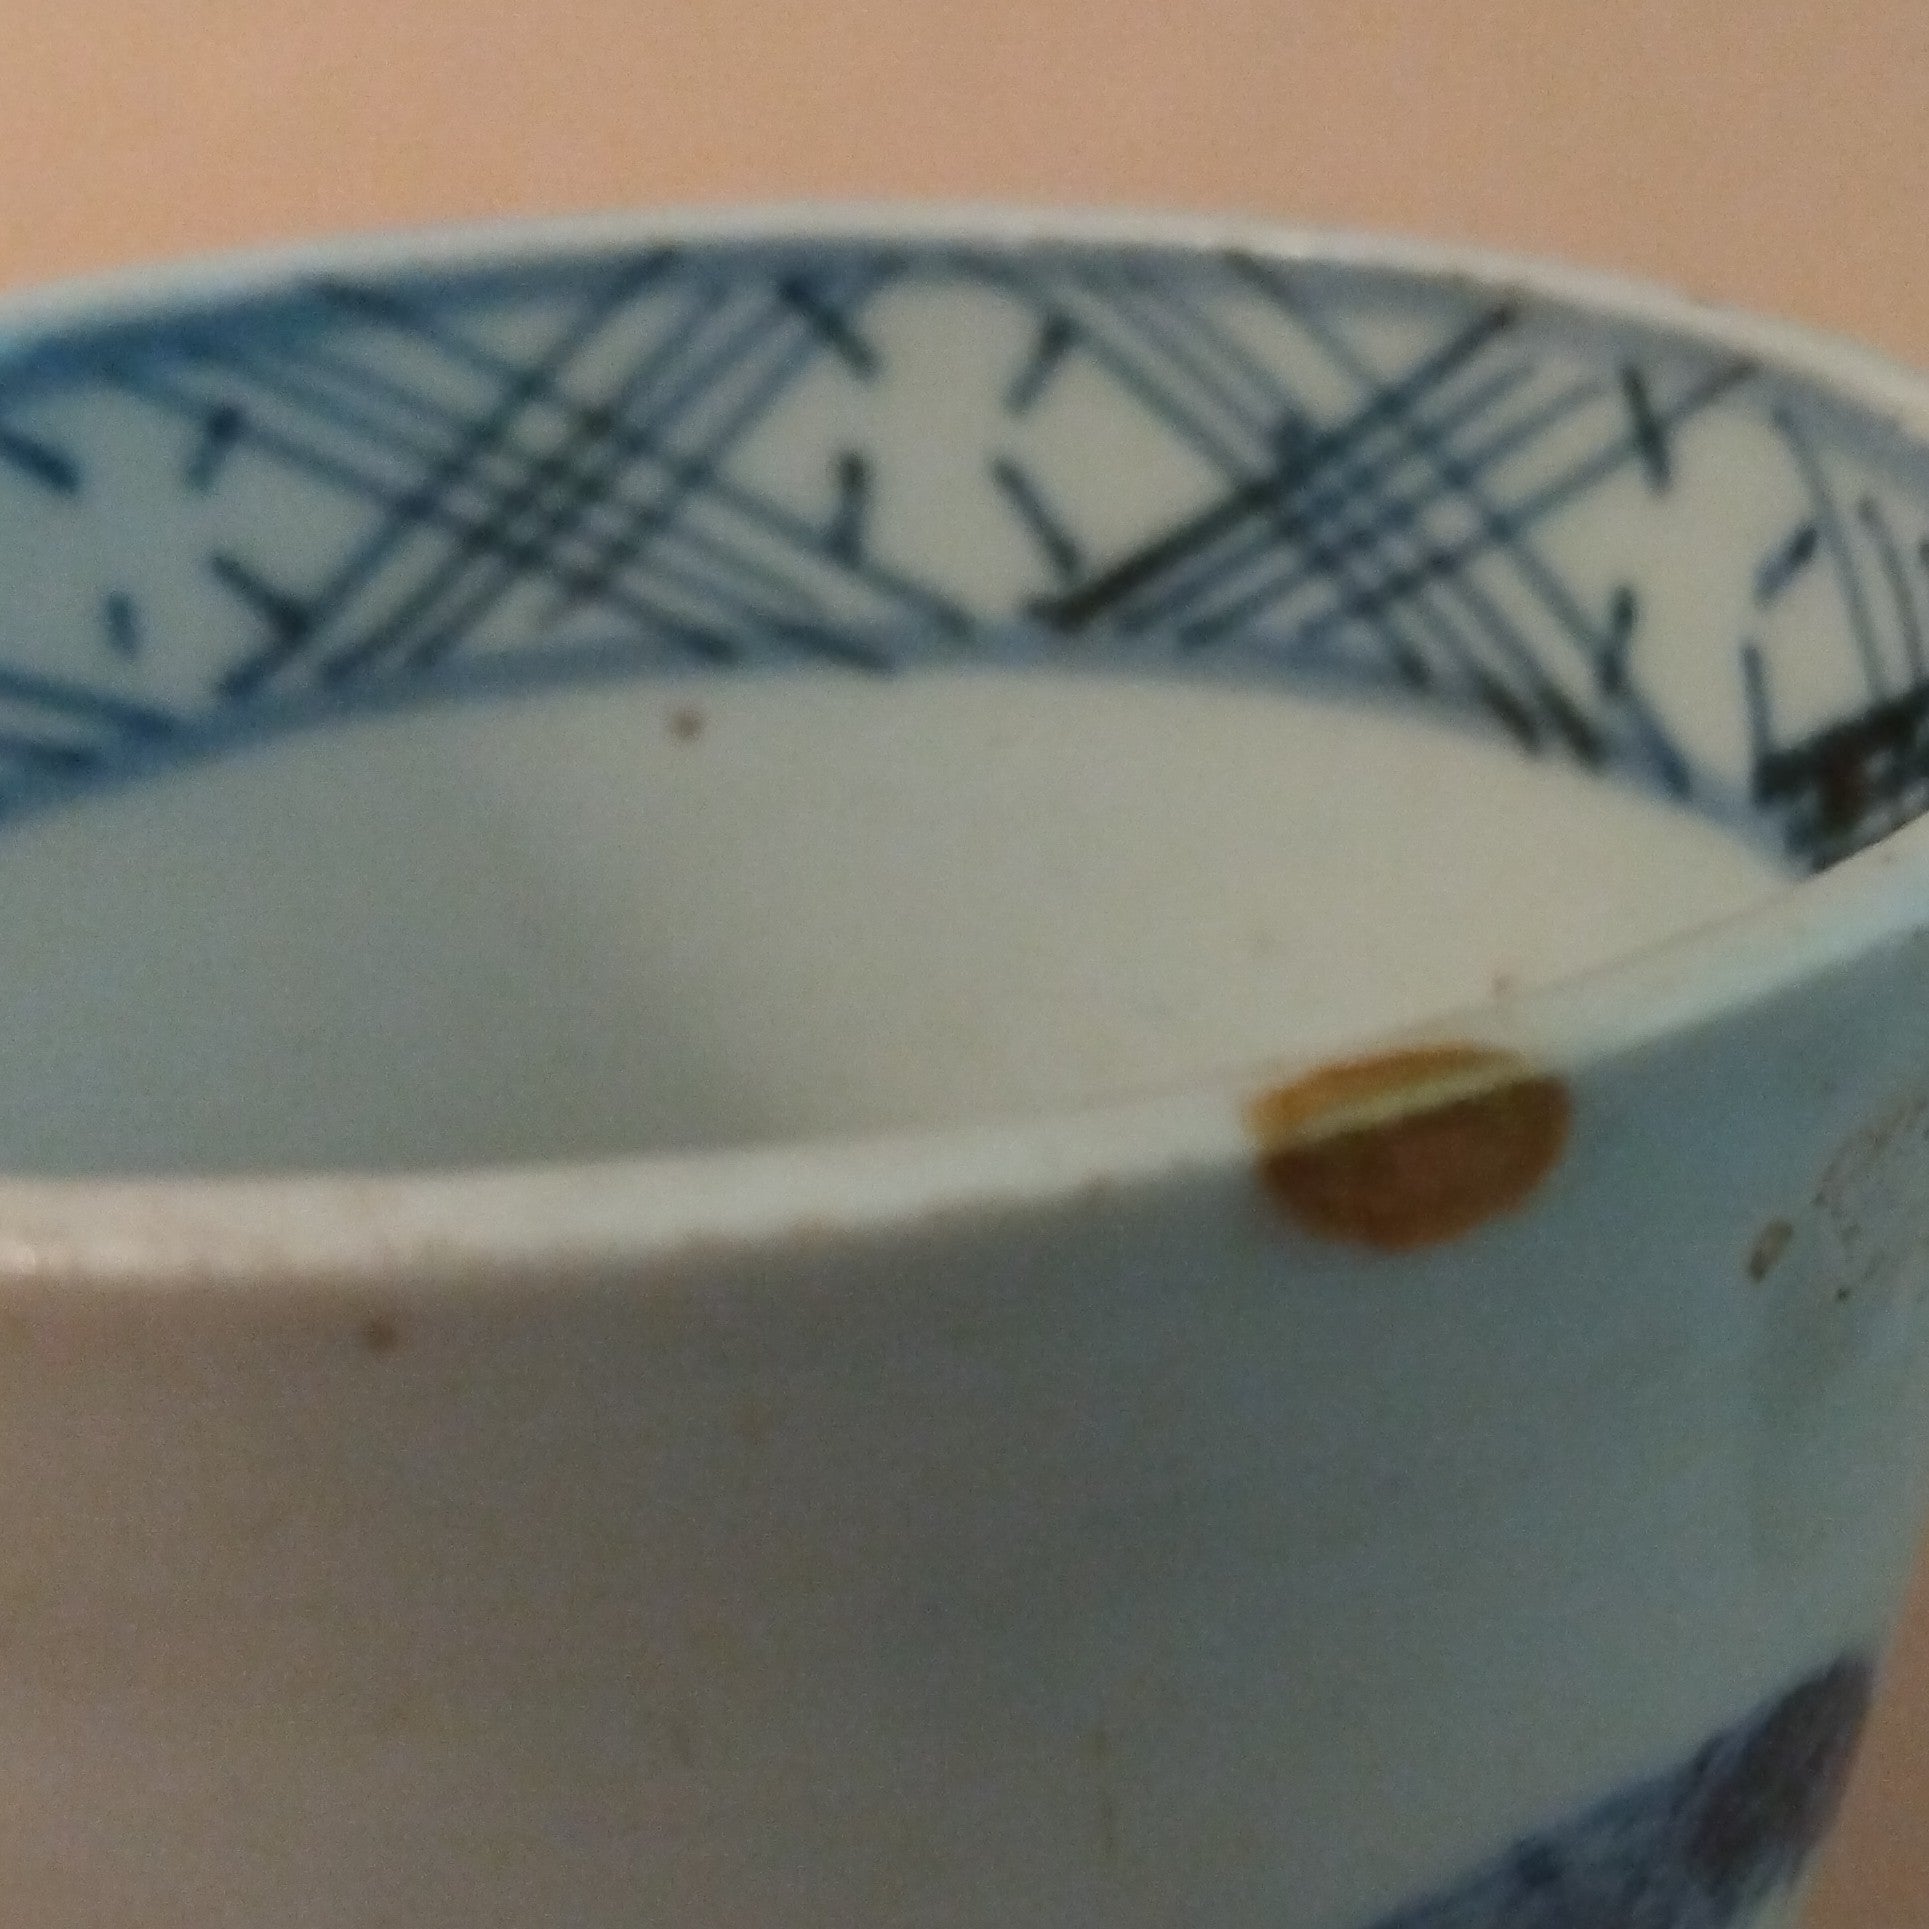 Imari Ware Soba Choko (Soba Noodle Dipping Cup) from the Mid-Late Edo Period (1600-1868)